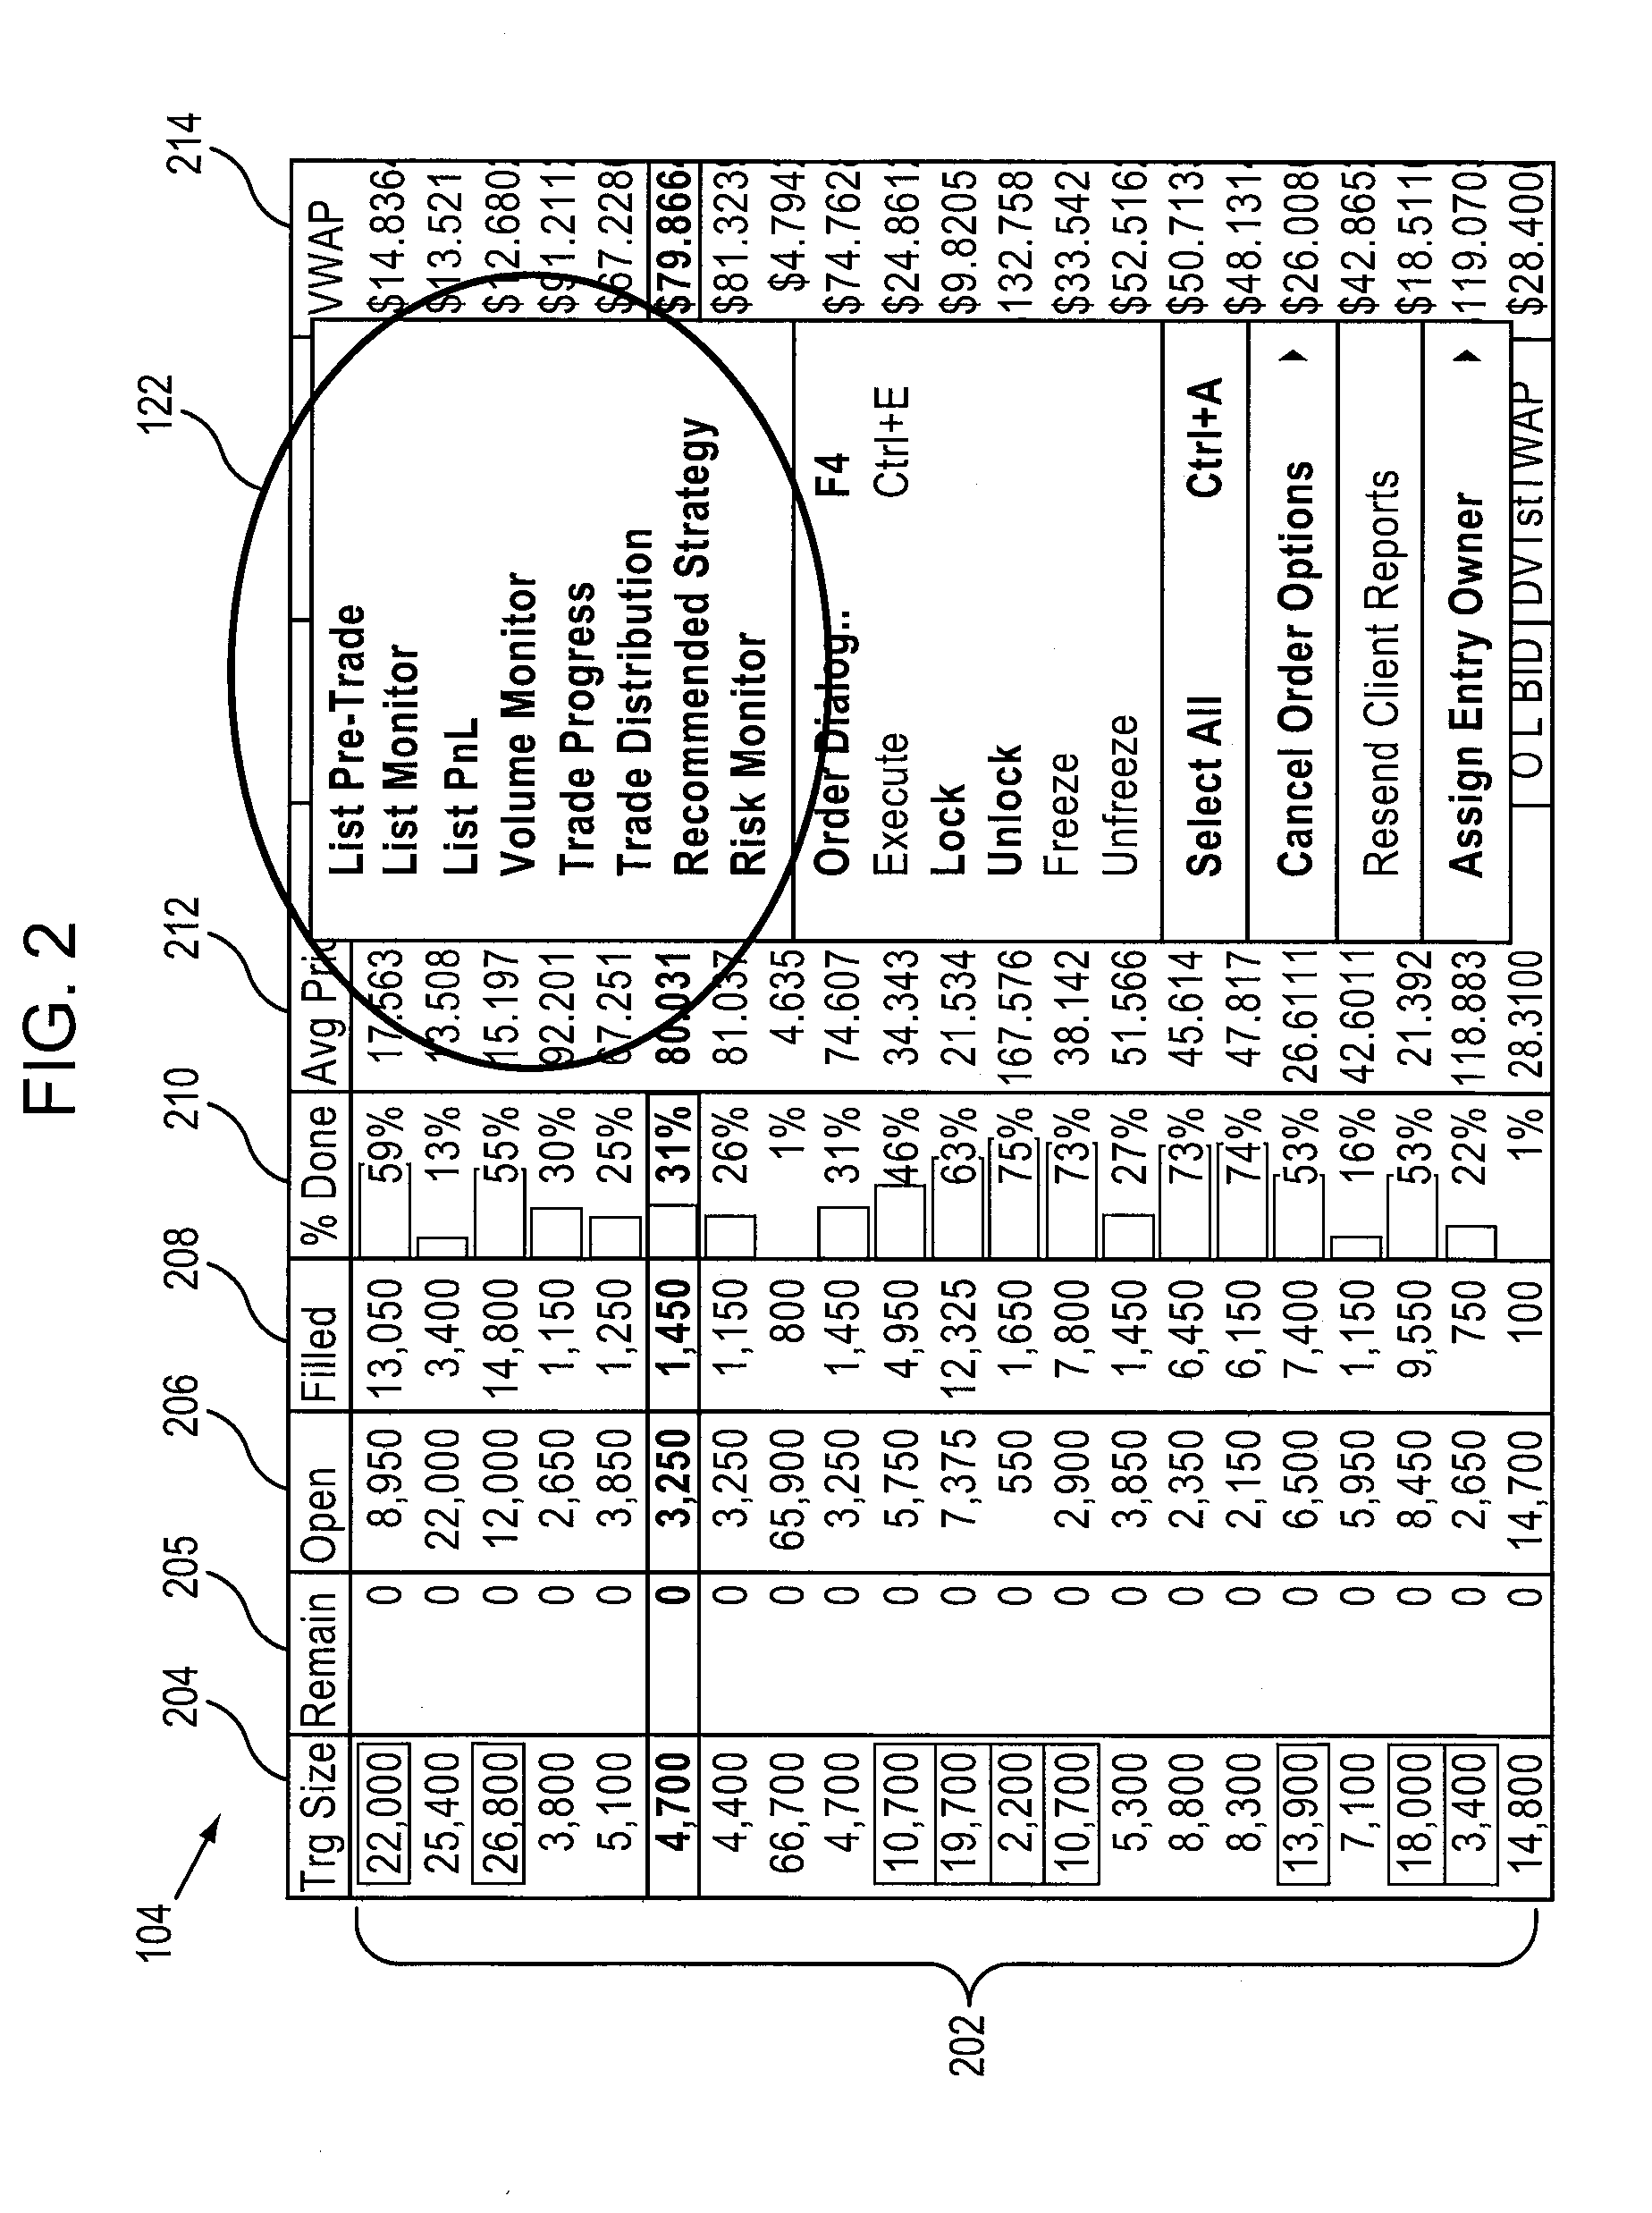 Systems, methods, and computer program products for providing real time analytic widgets in a financial trading system